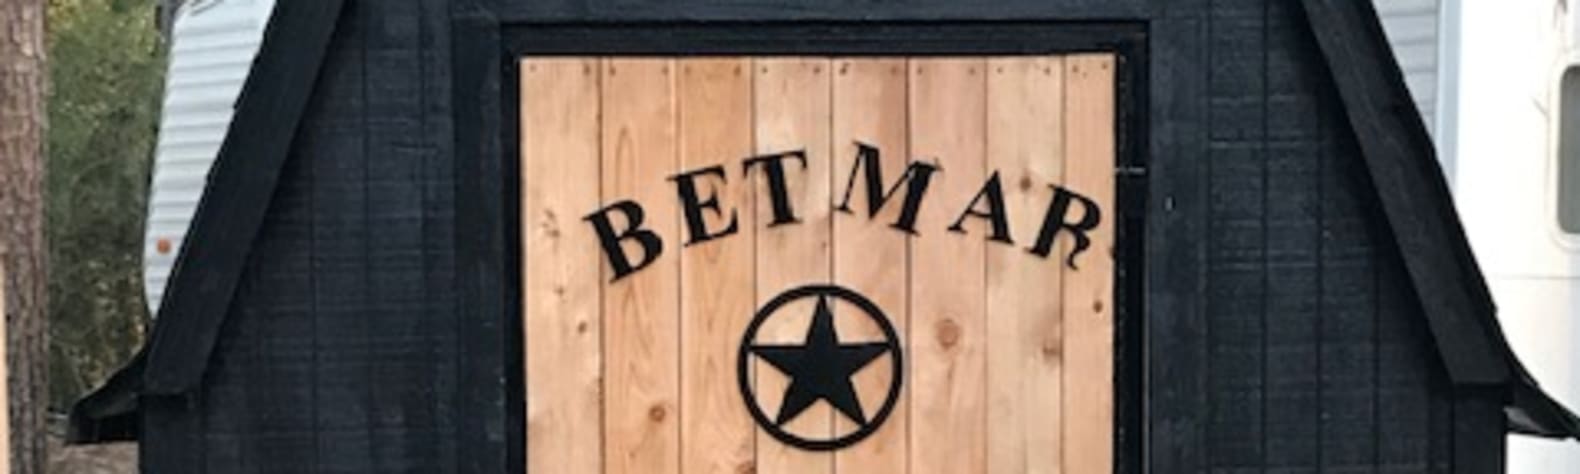 BetMar Tiny Home, RV, and Camping